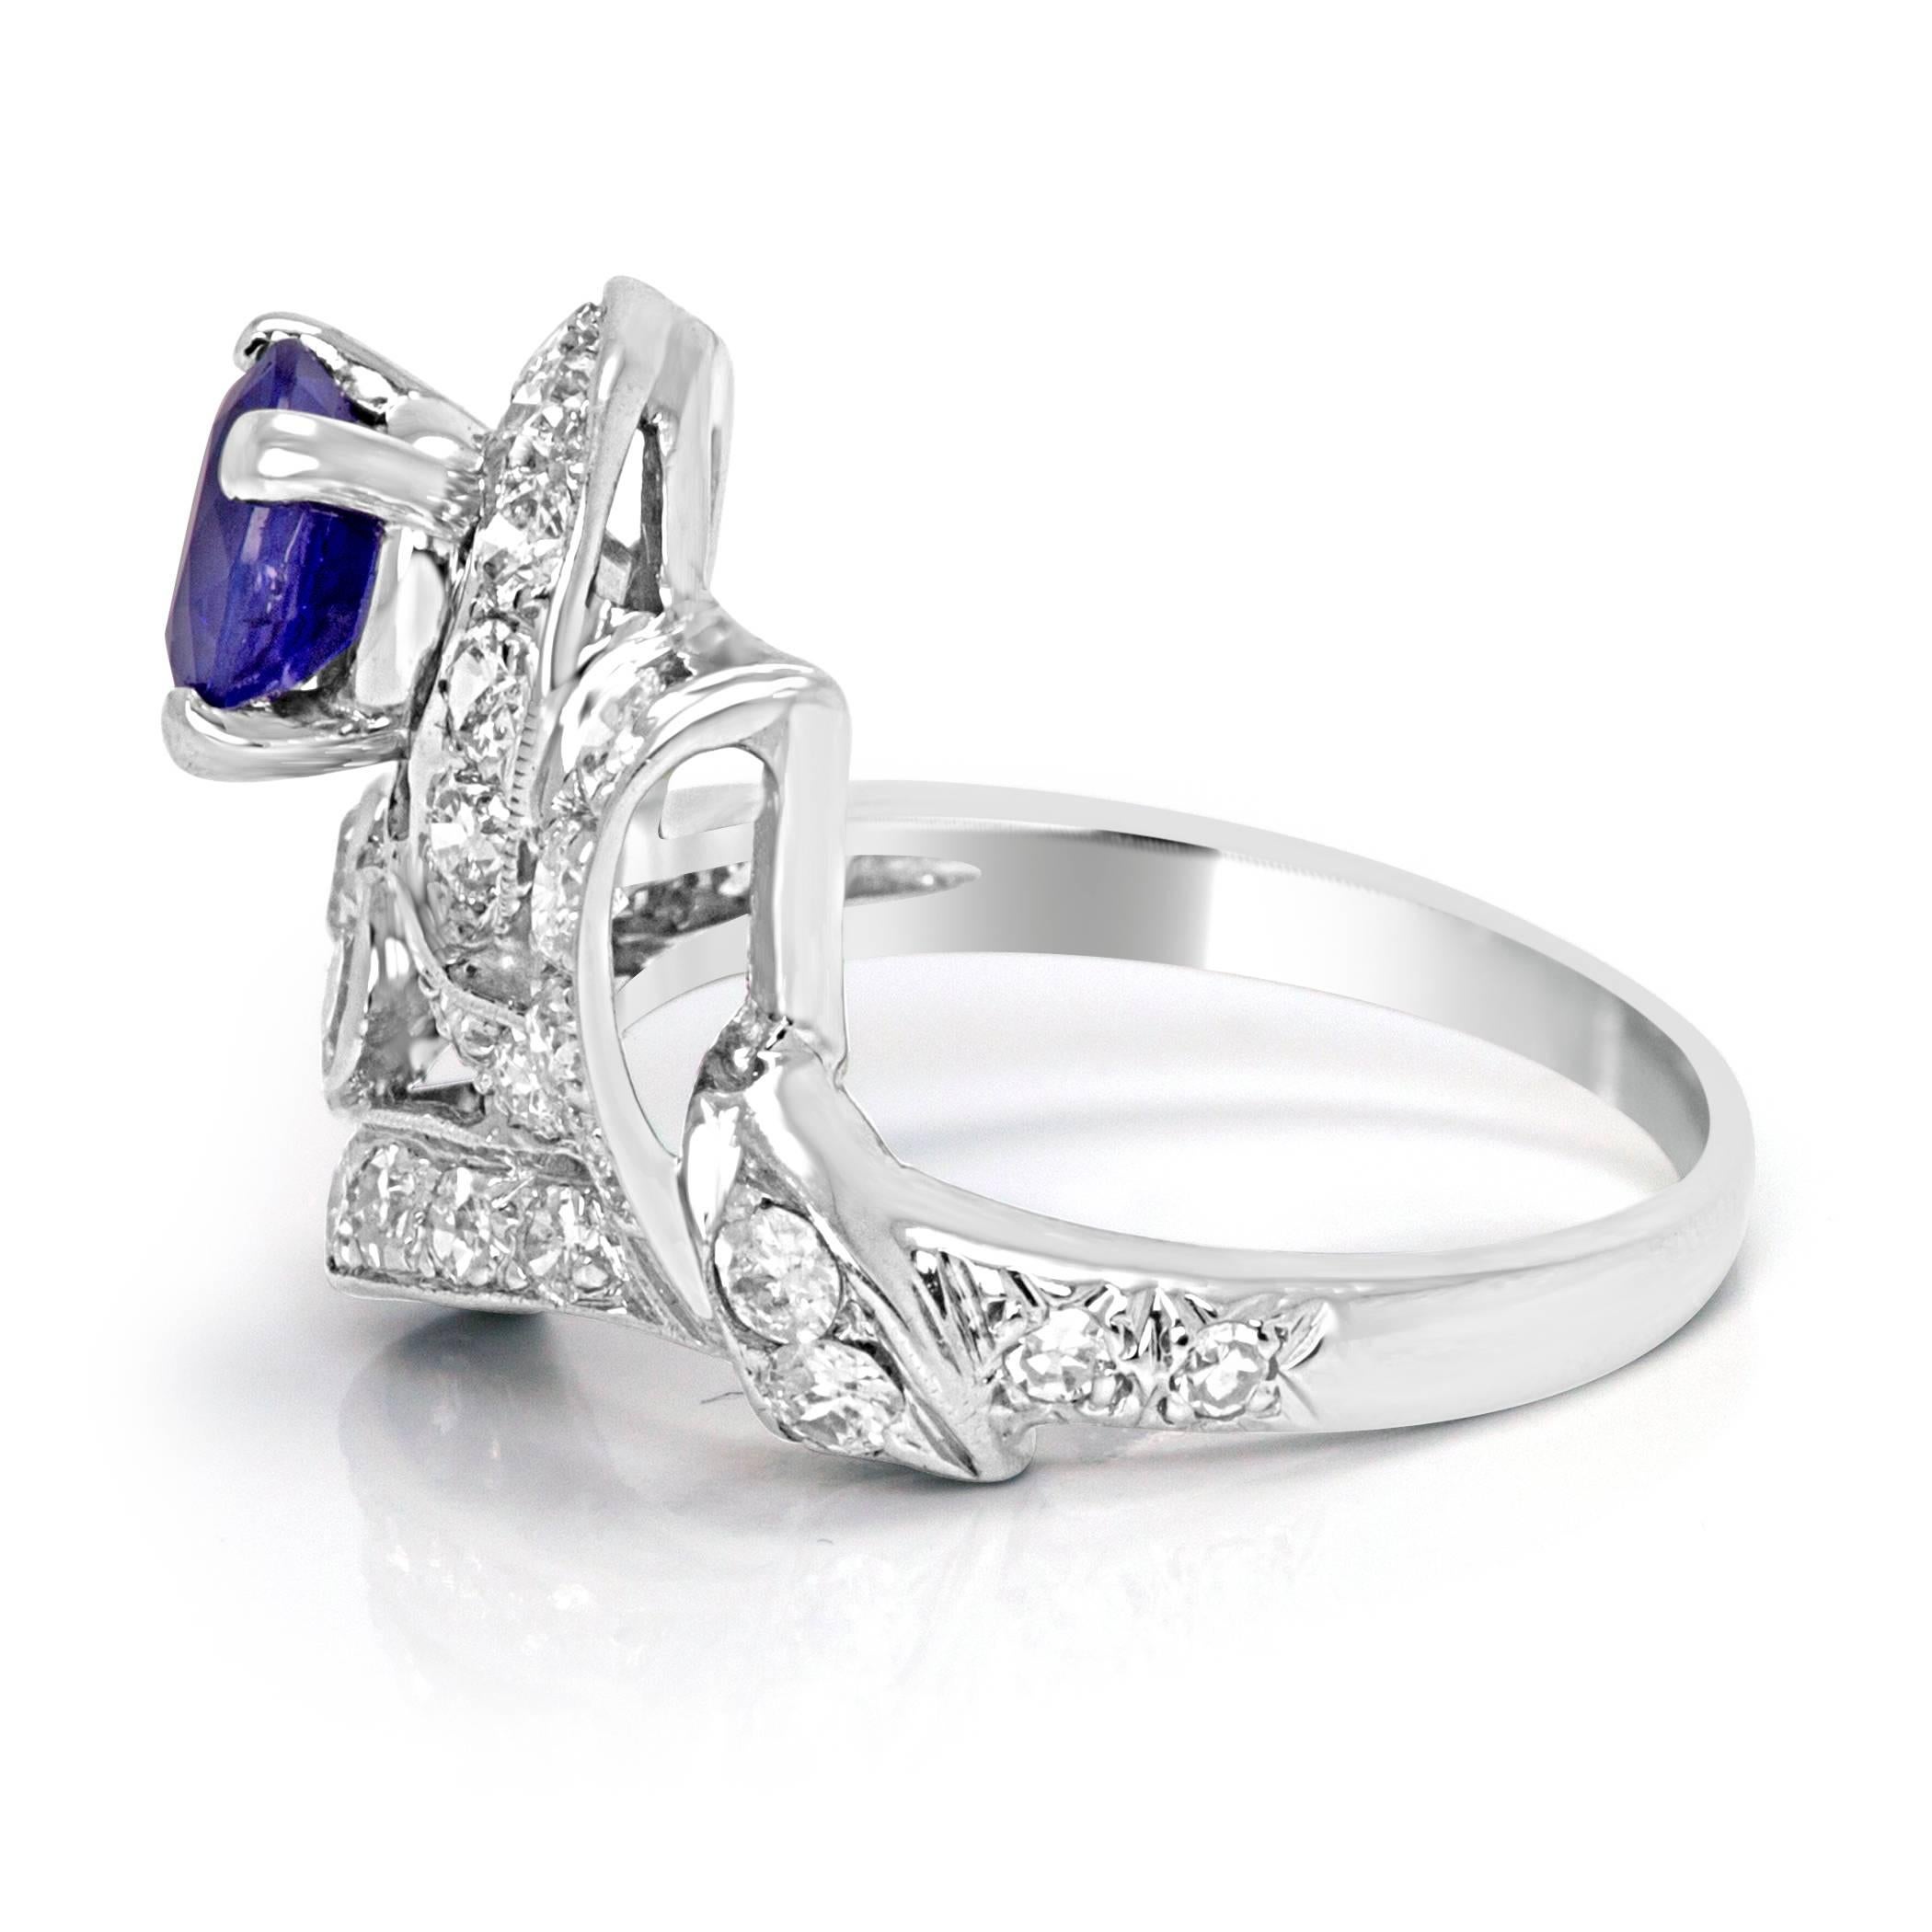 1.10 Carat Heated Blue Sapphire round with white diamond round approximate 0.45 carat total weight in Platinum Art Deco  Ring.